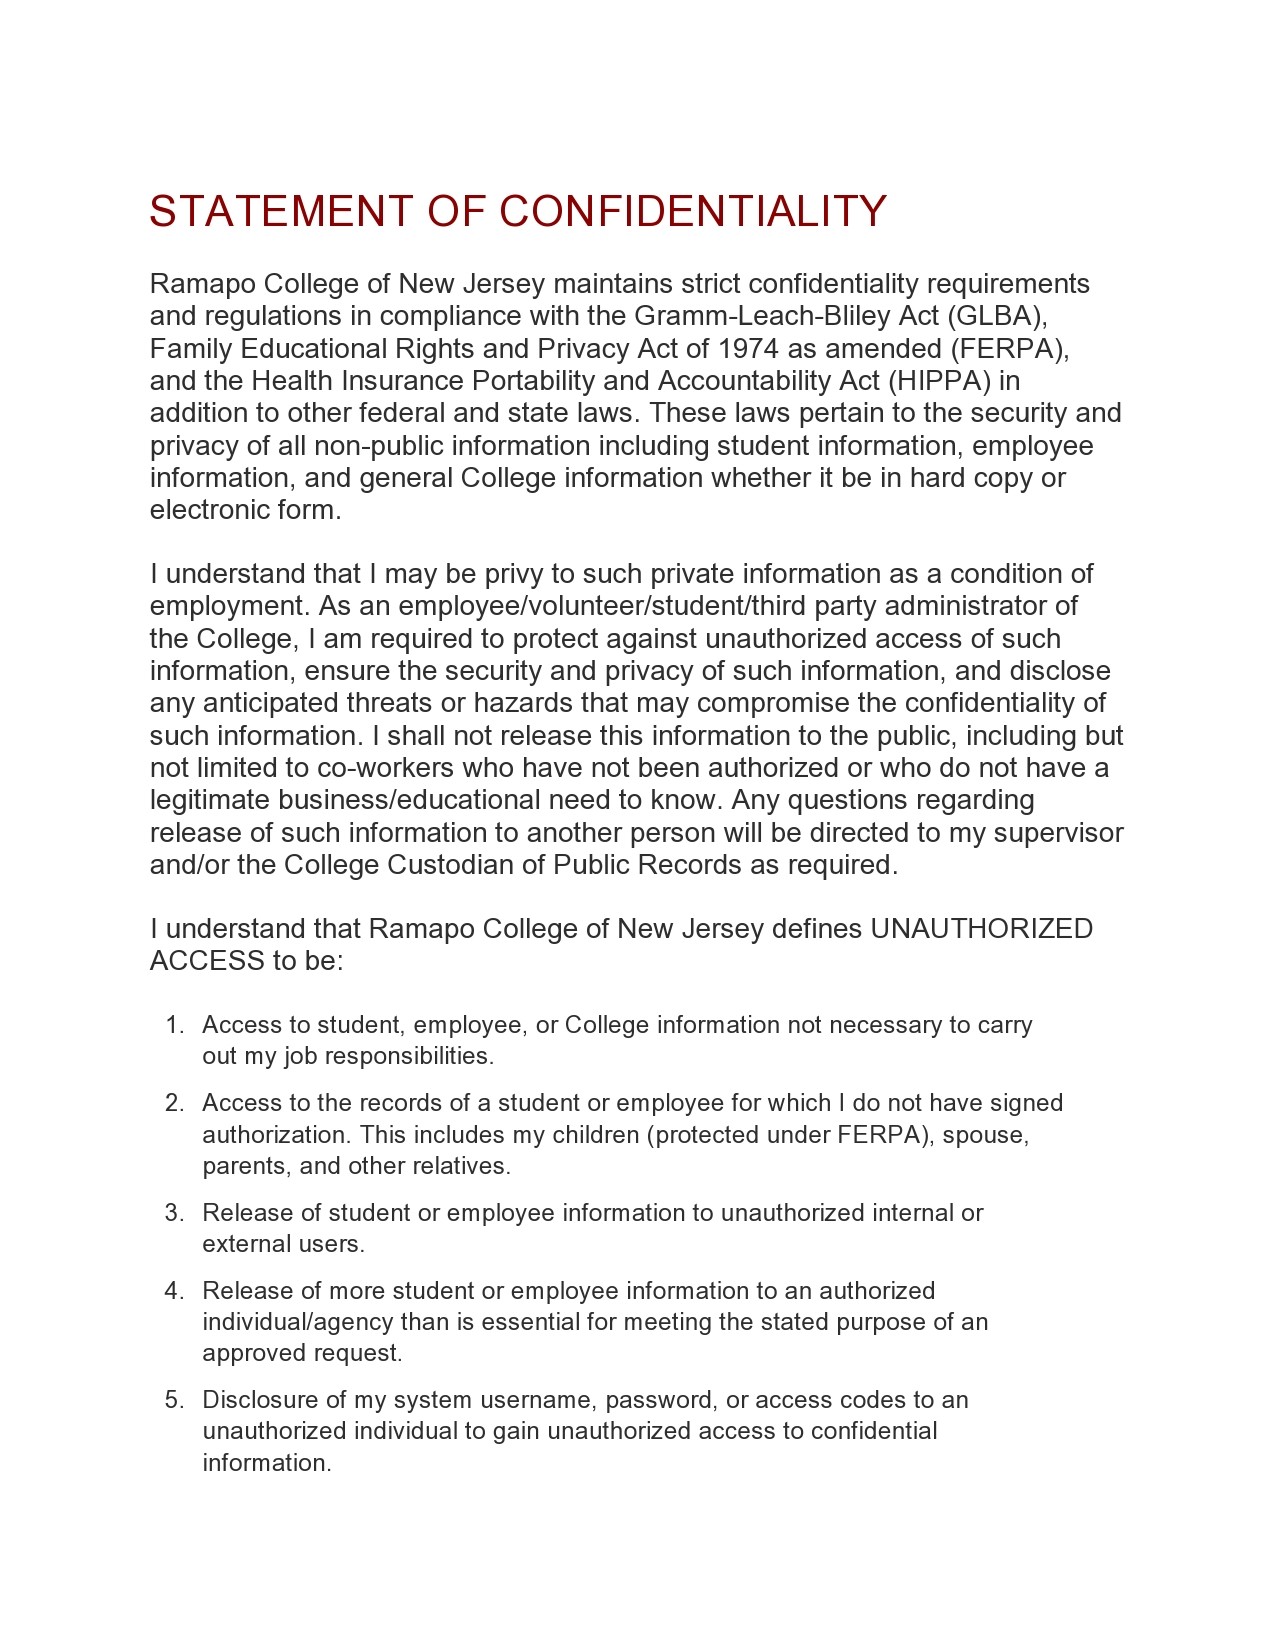 Free confidentiality statement 09